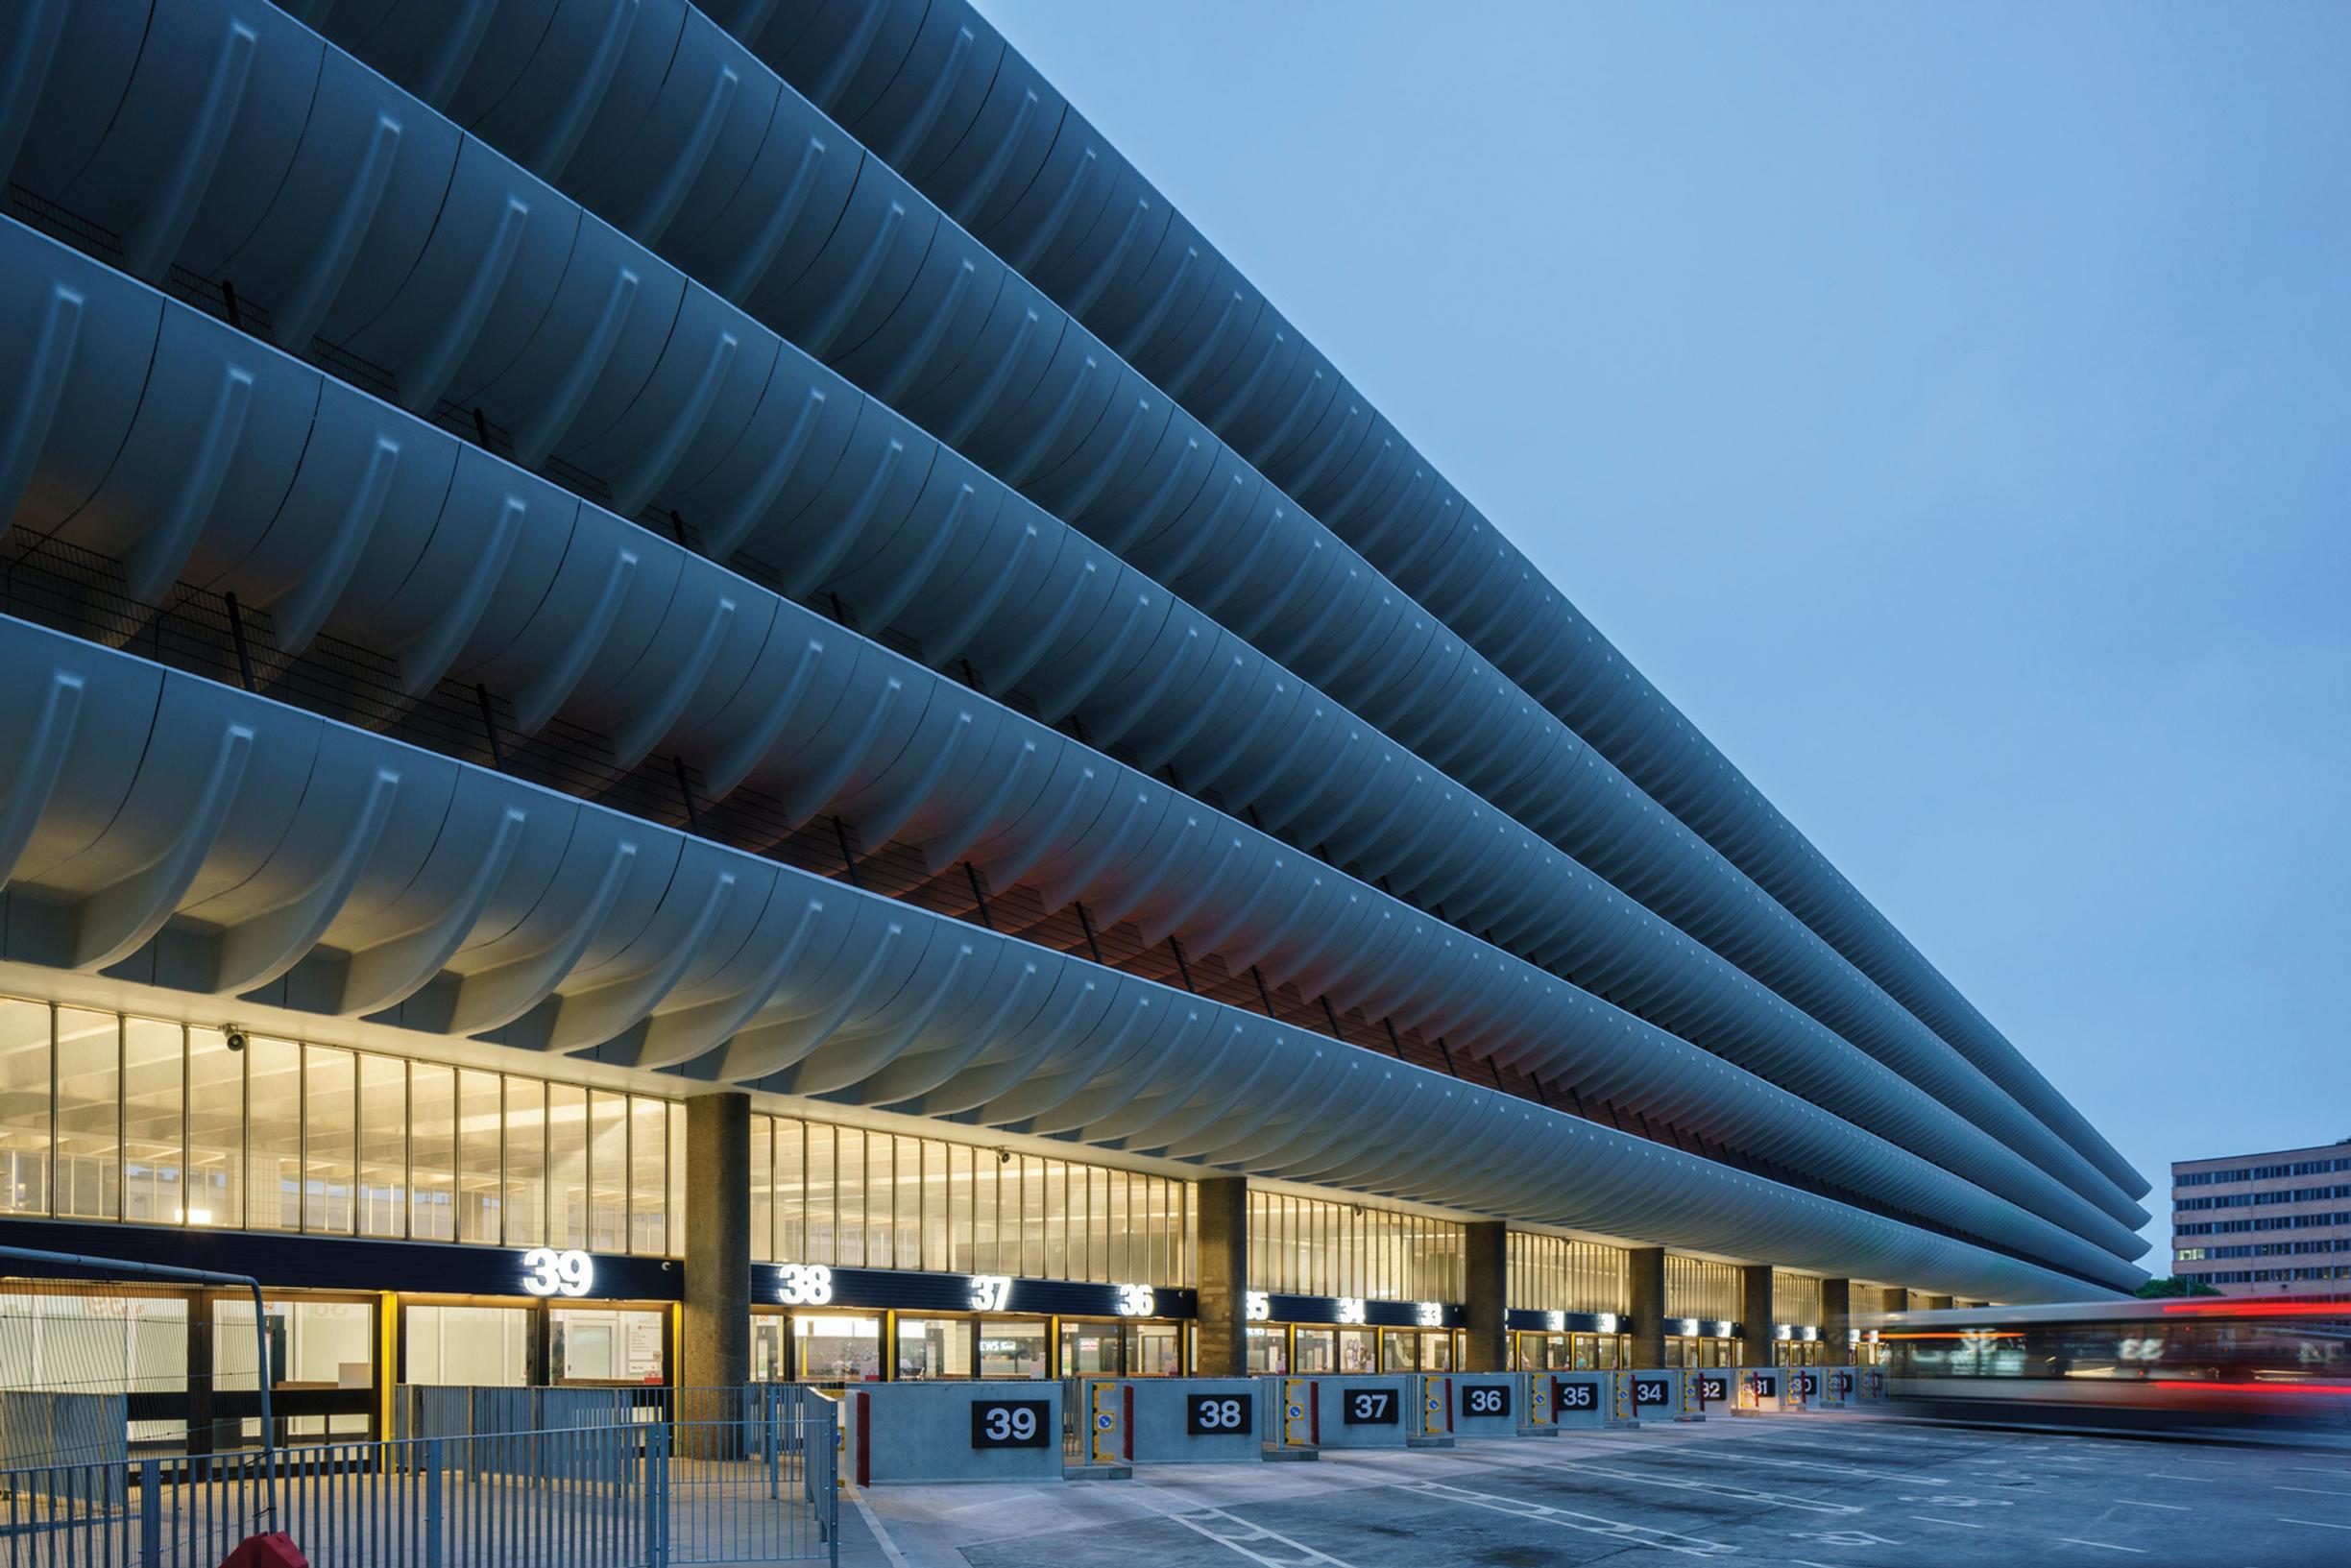 Lancashire says the proposed changes to charges at Preston’s refurbished bus station will impact operators’ costs by between -4 per cent and +80 per cent